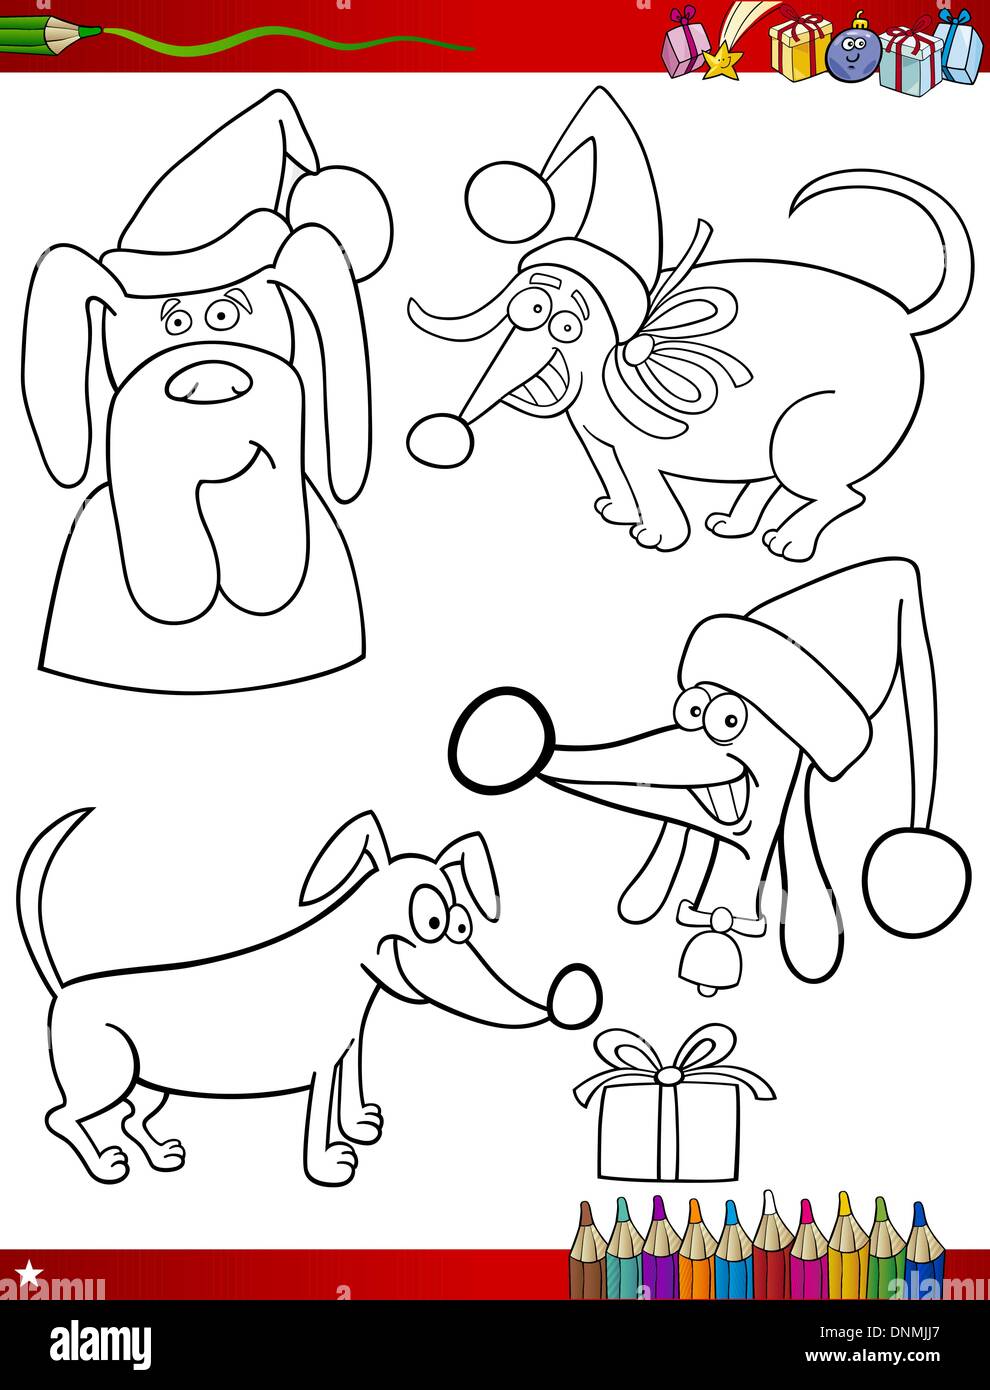 Coloring Book or Page Cartoon Illustration of Black and White Christmas Themes Set with Santa Claus Dogs and Xmas Presents and D Stock Vector